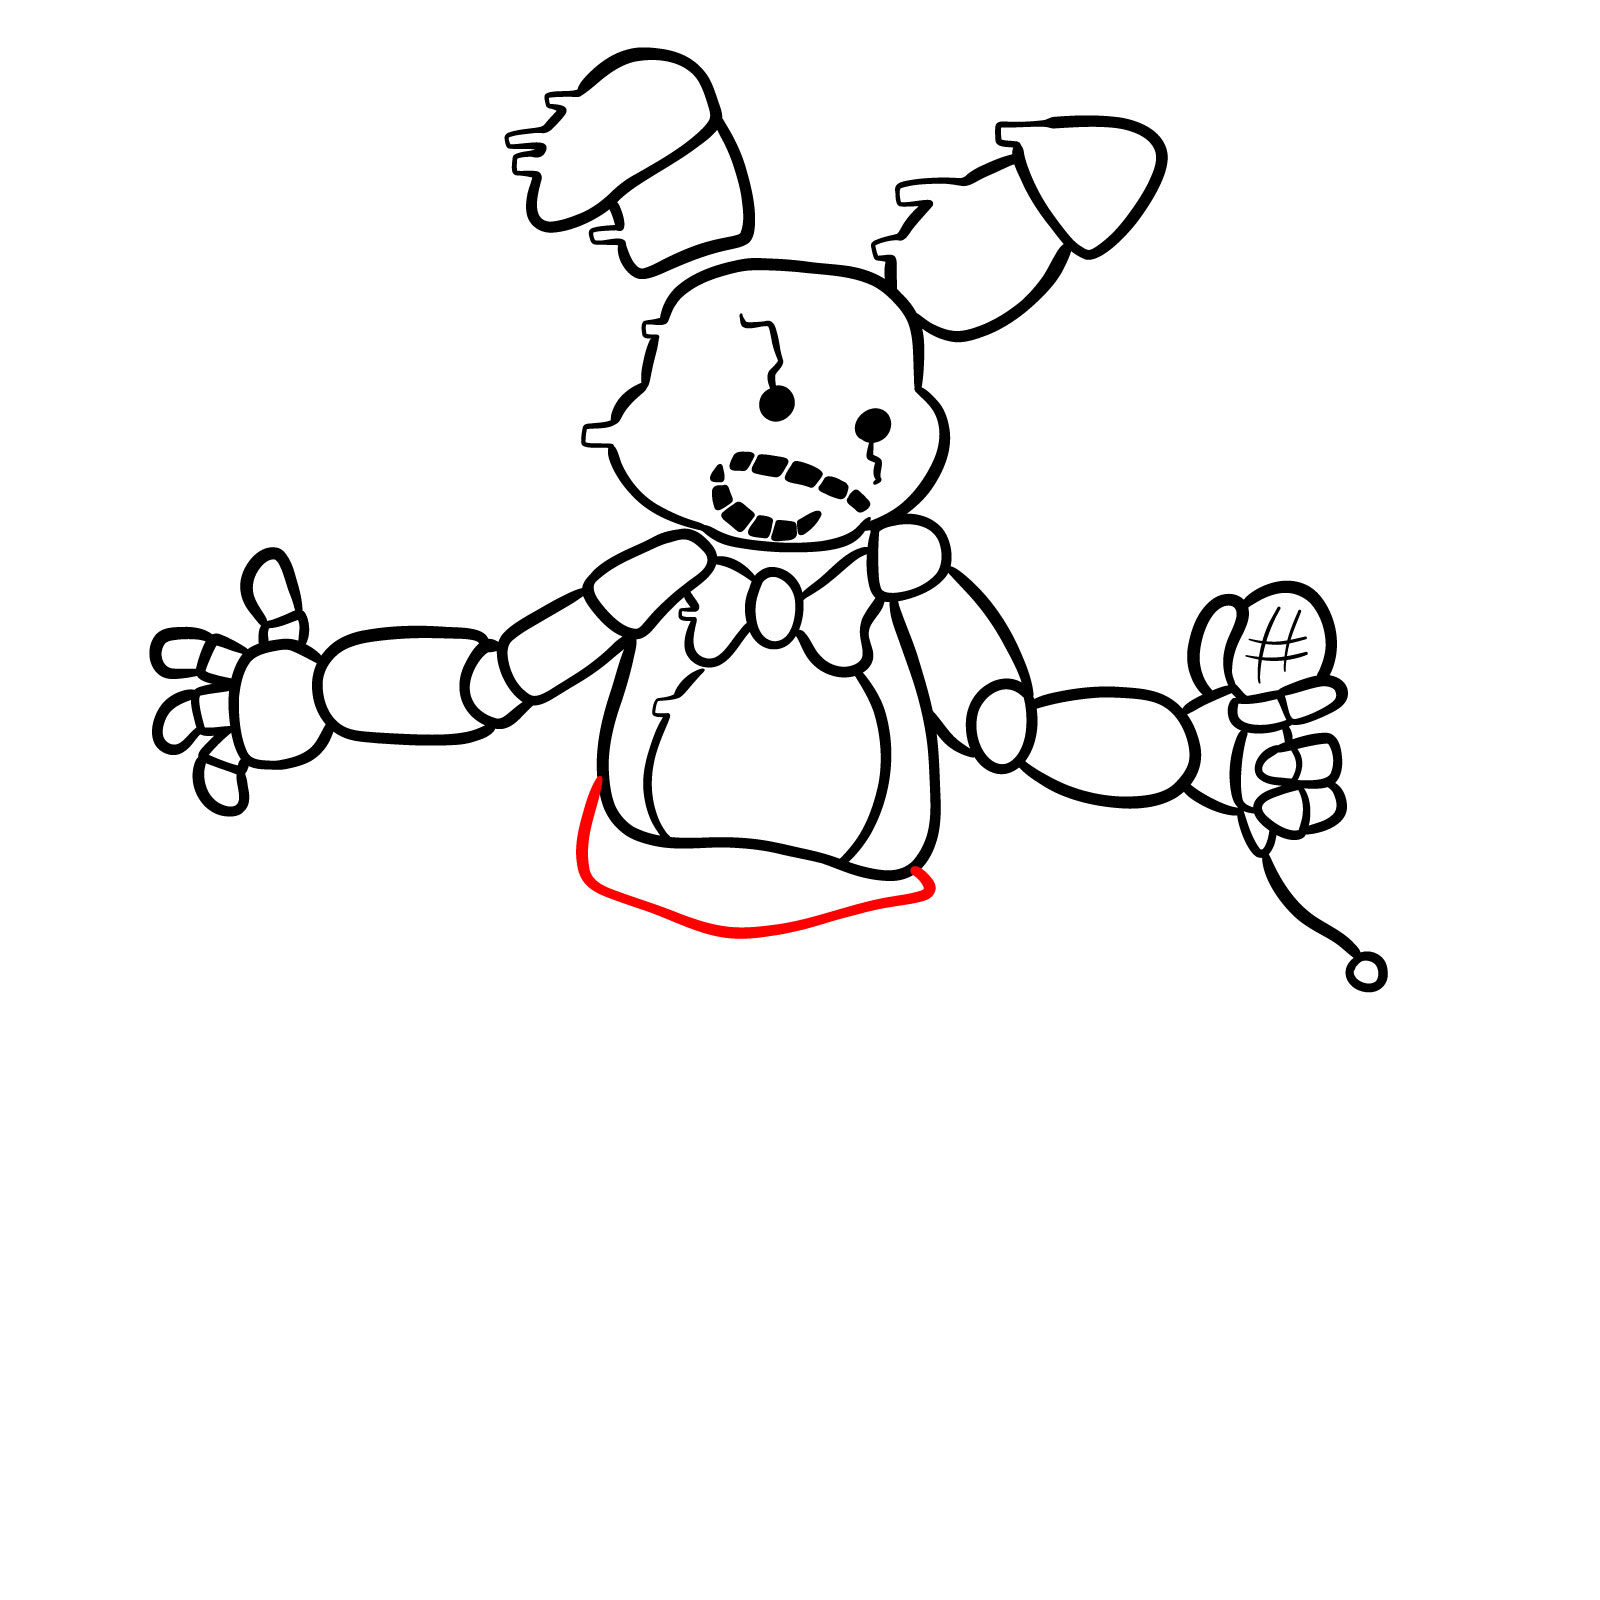 How to draw Shadow Bonnie from FNF: Glitched Legends - step 25